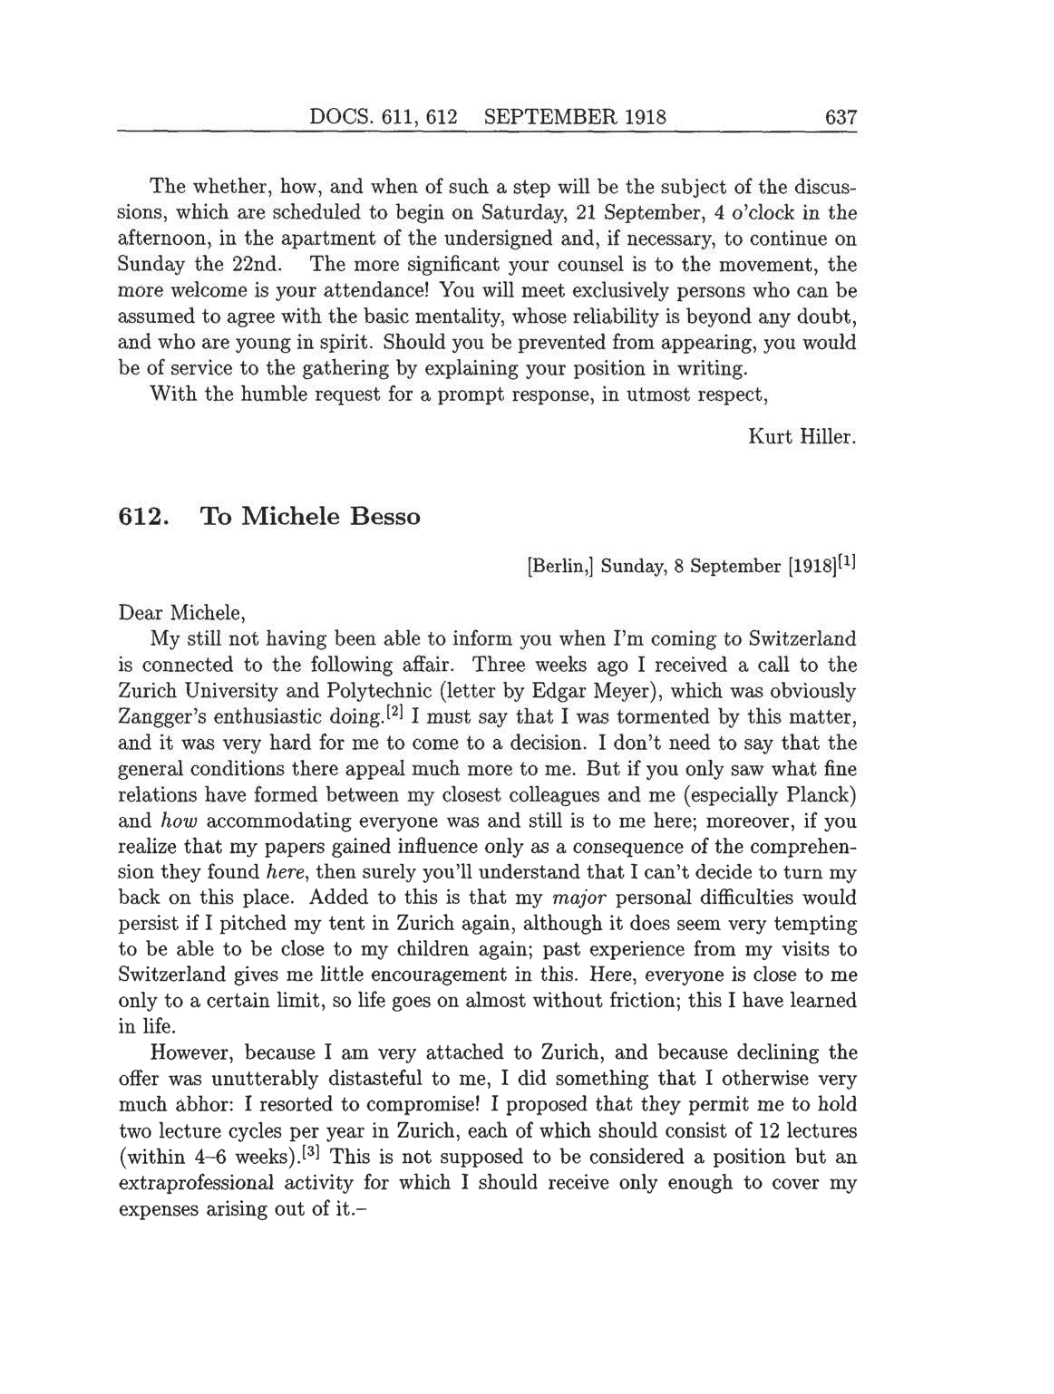 Volume 8: The Berlin Years: Correspondence, 1914-1918 (English translation supplement) page 637